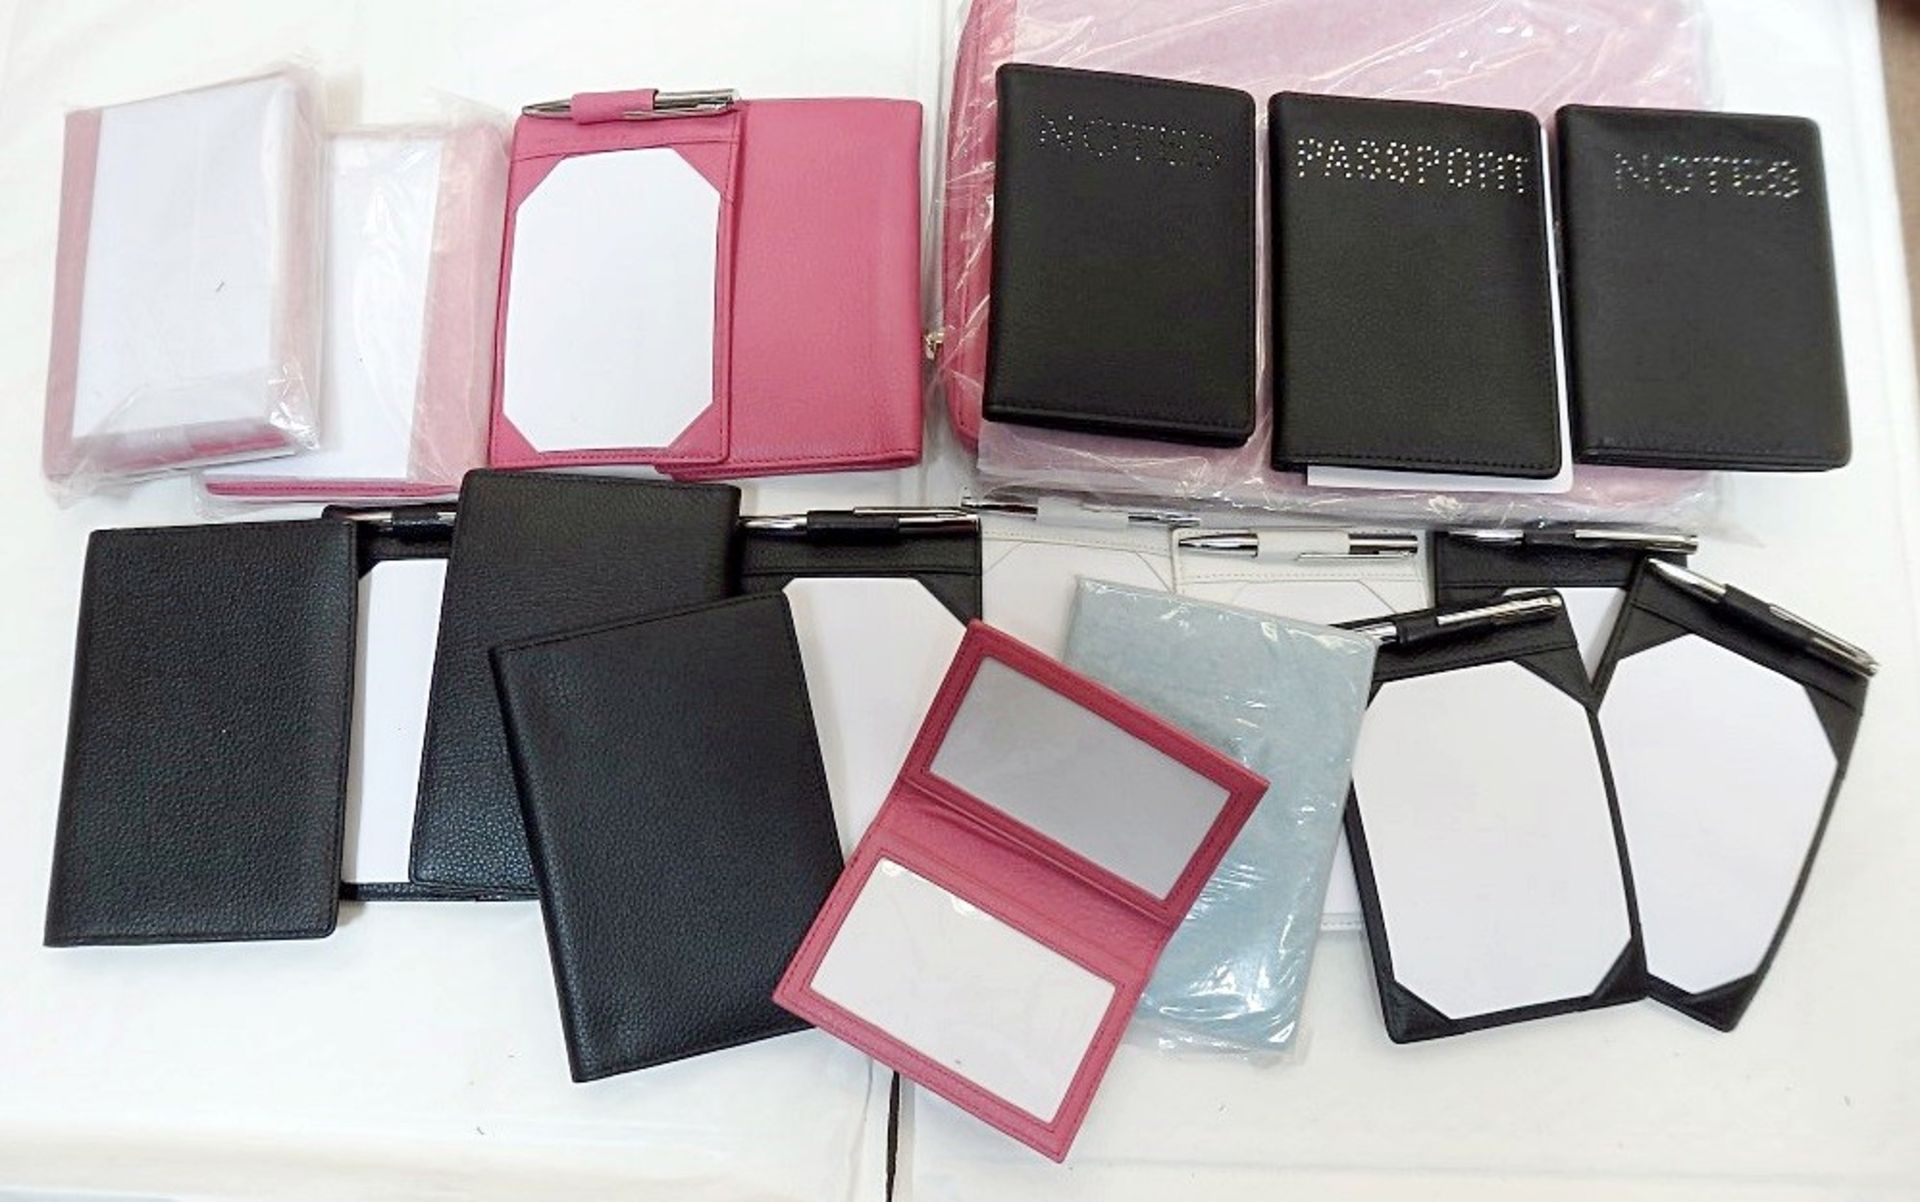 **Mixed Lot** 20 x Assorted Fine Leather Gift Items From ICE LONDON - Includes A Great Selection